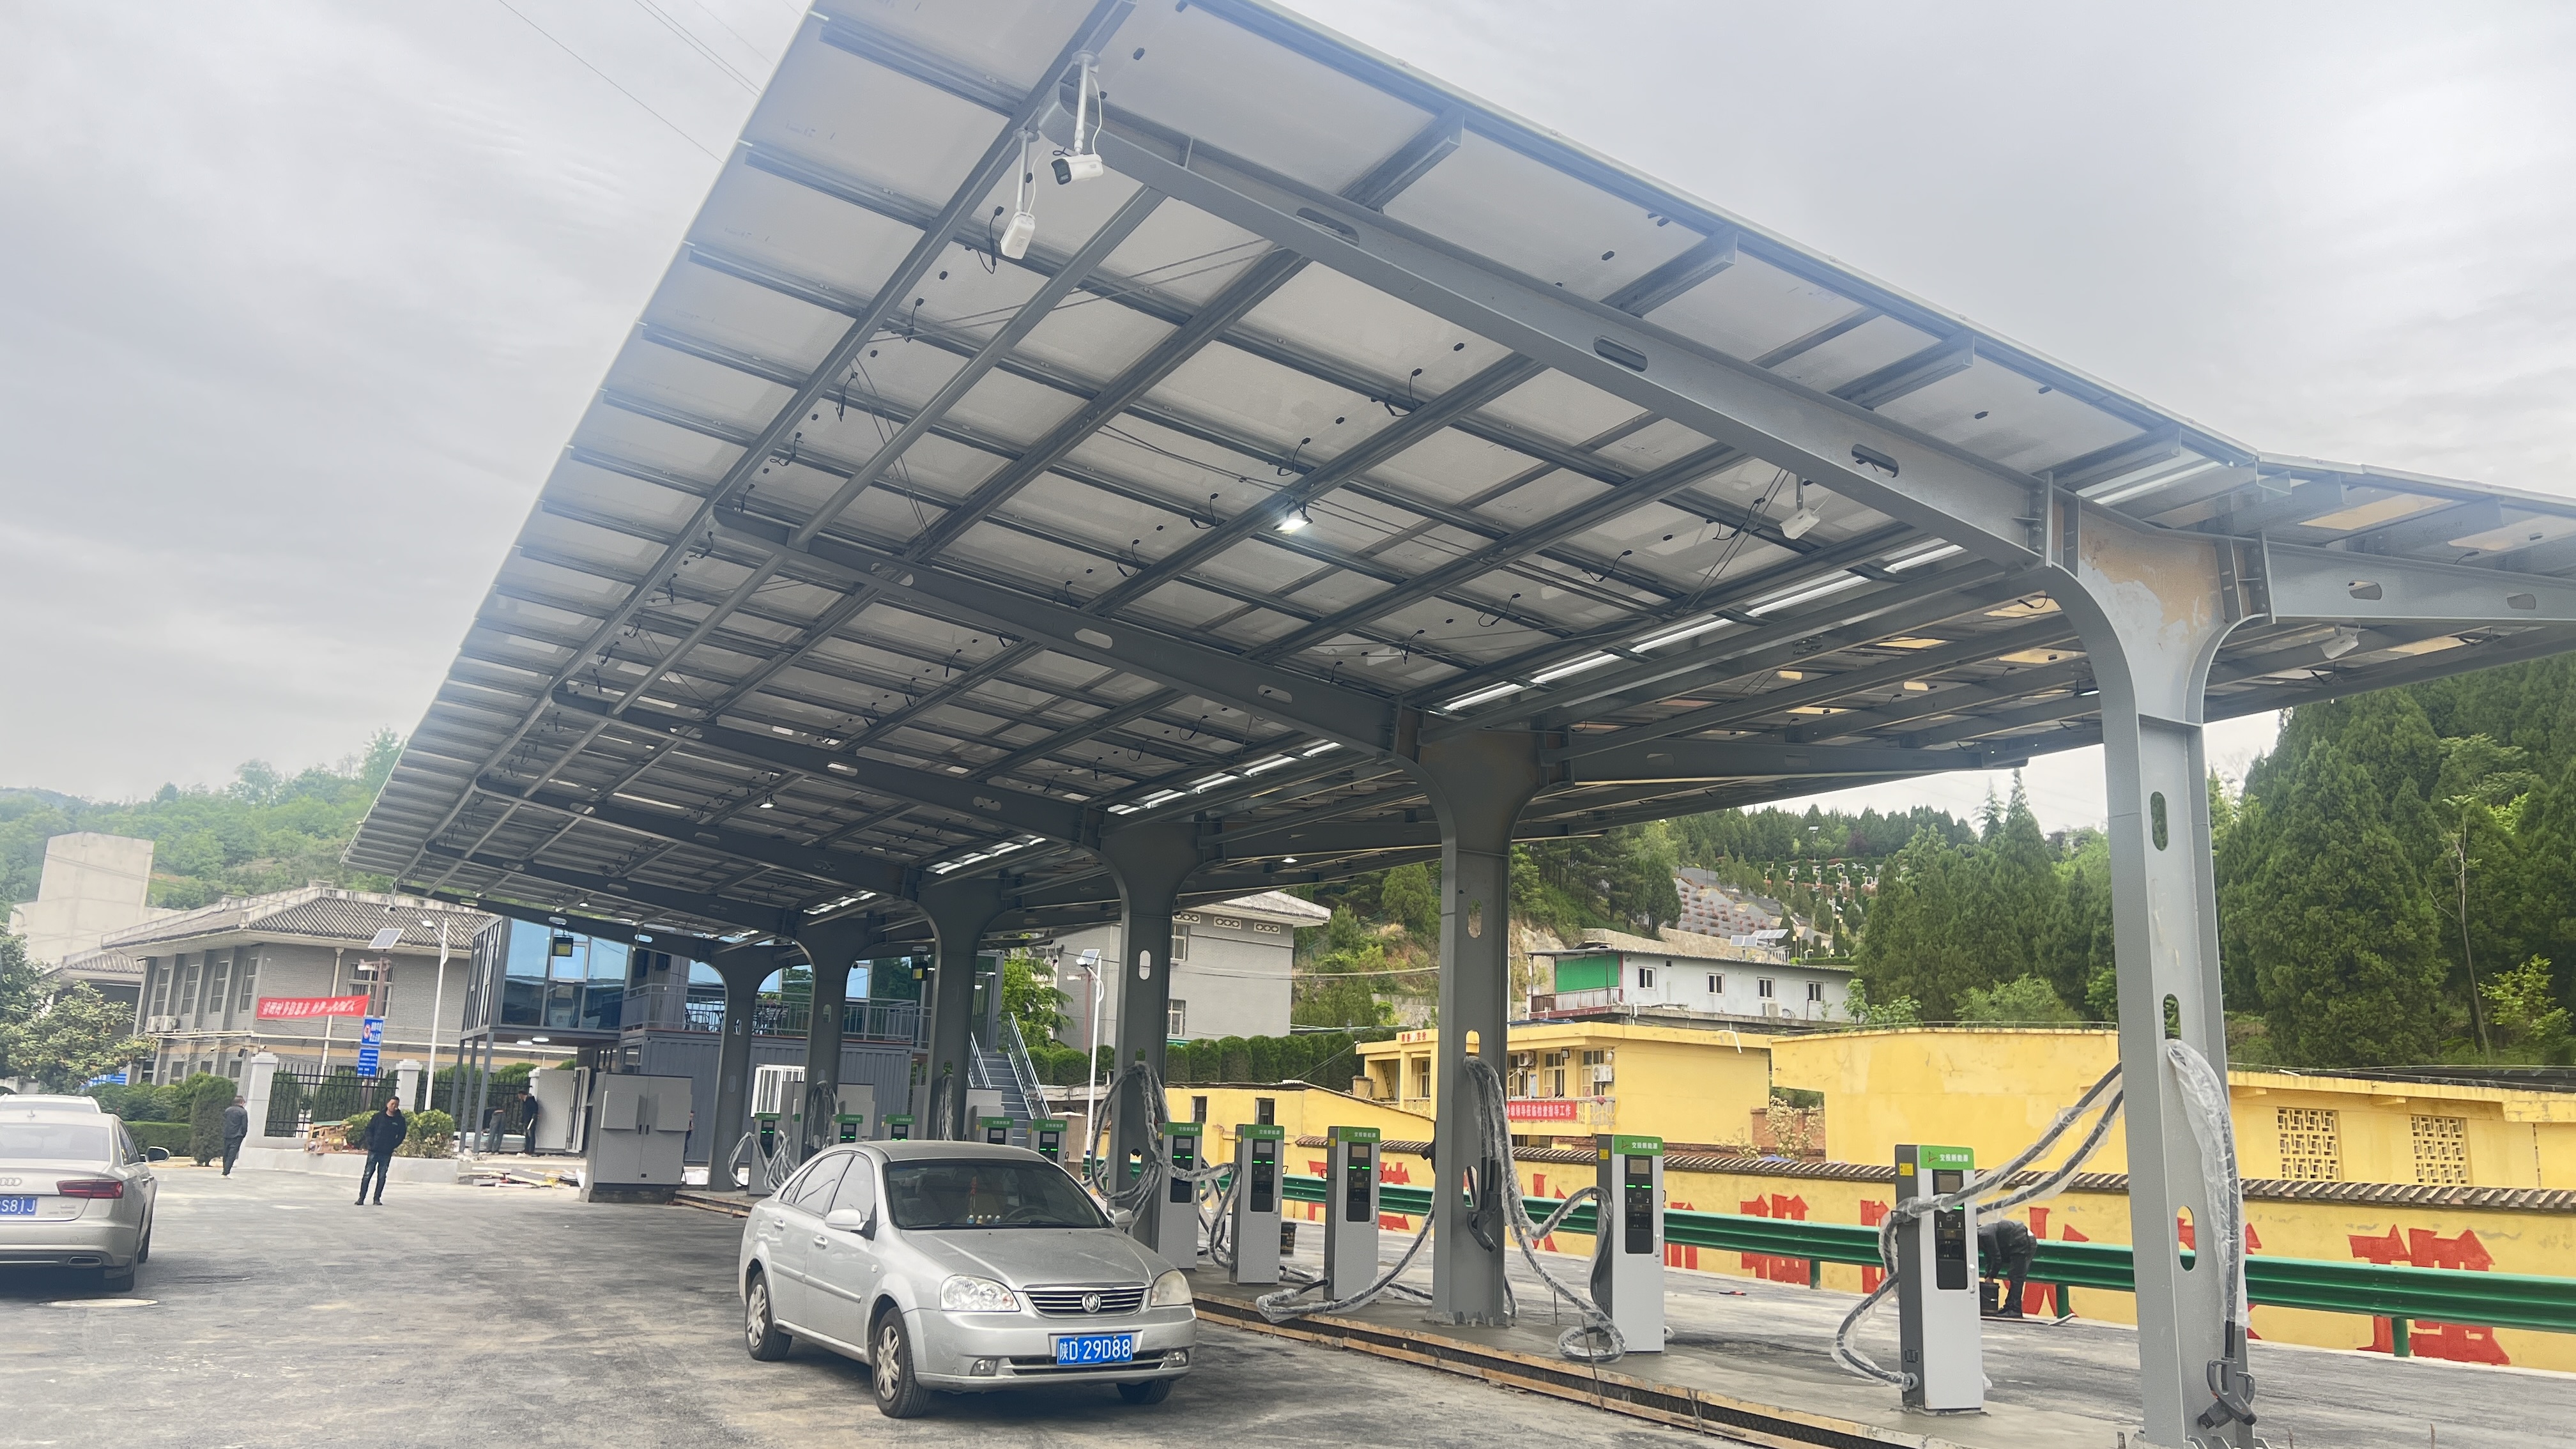 Overview of photovoltaic carport